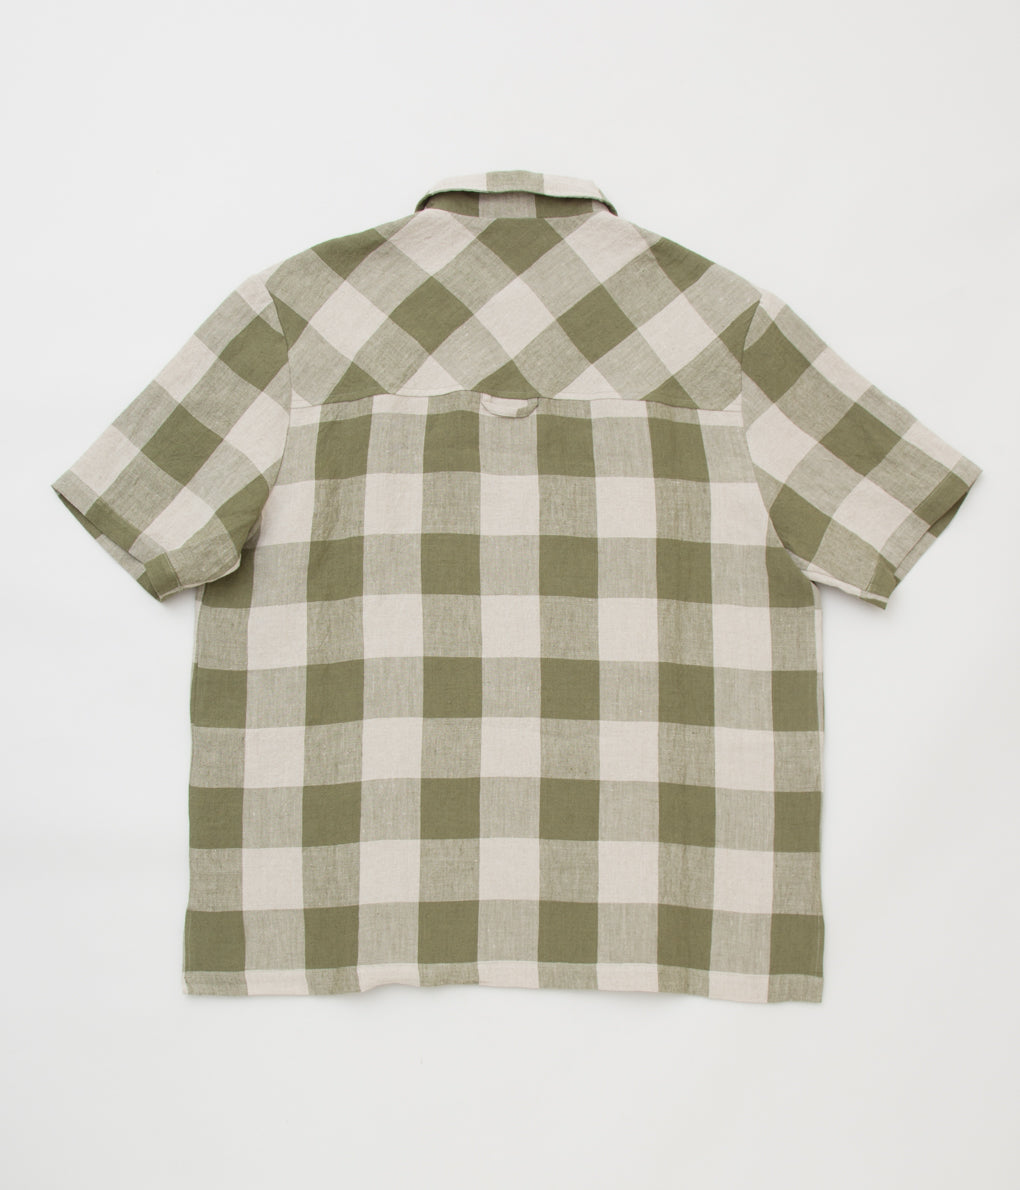 CAWLEY "AUGUST SHIRT" (GREEN FLAX)